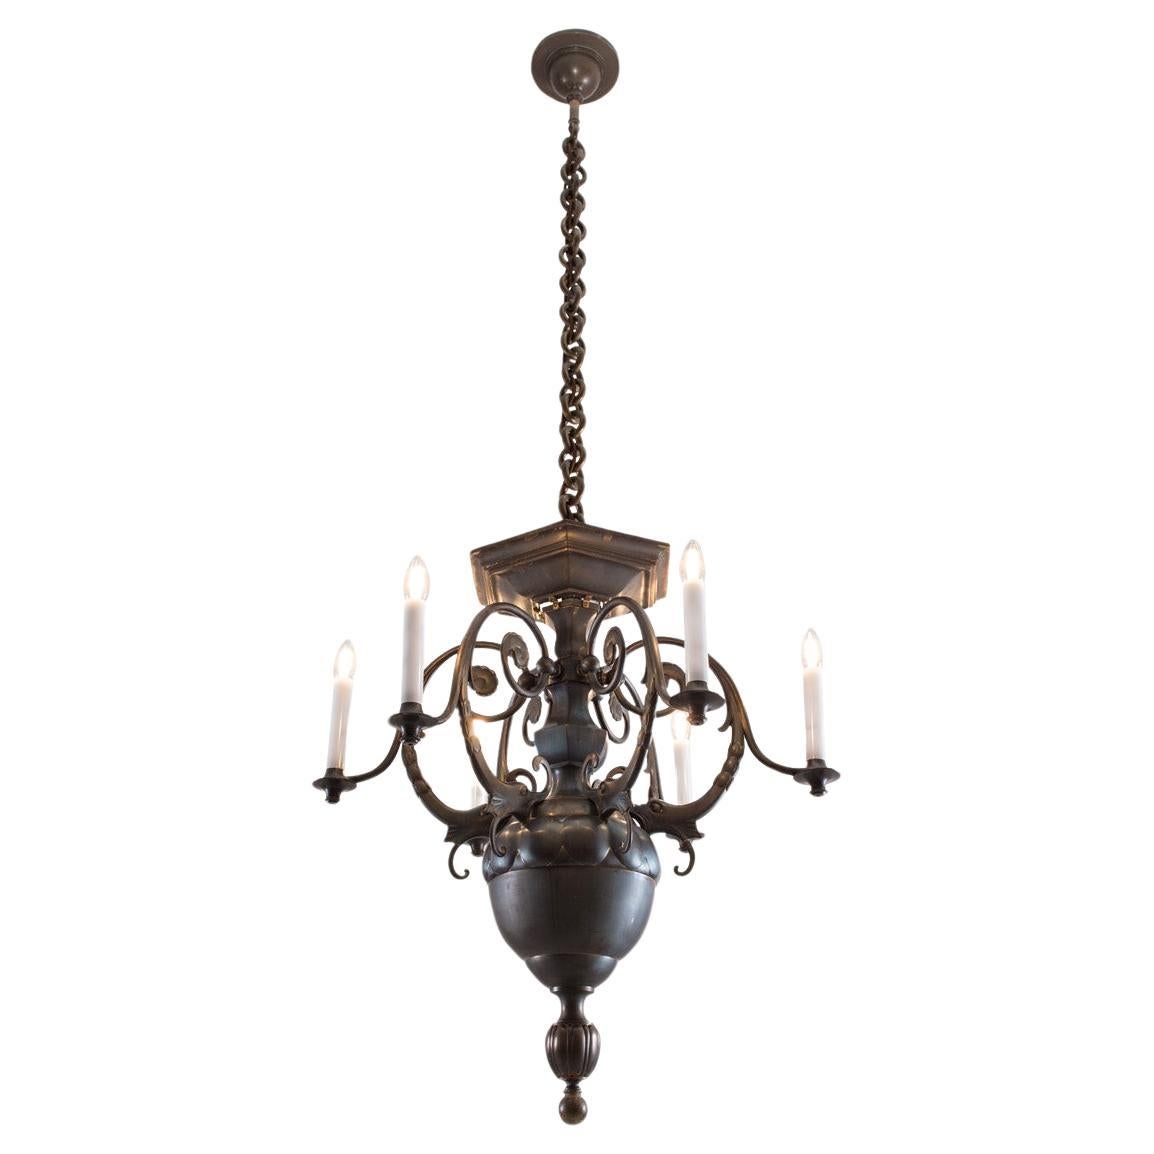 A richly figurative ornamented chandelier in patinated bronze, the given measures are without the chain.

The total drop of this chandelier can be custom made.